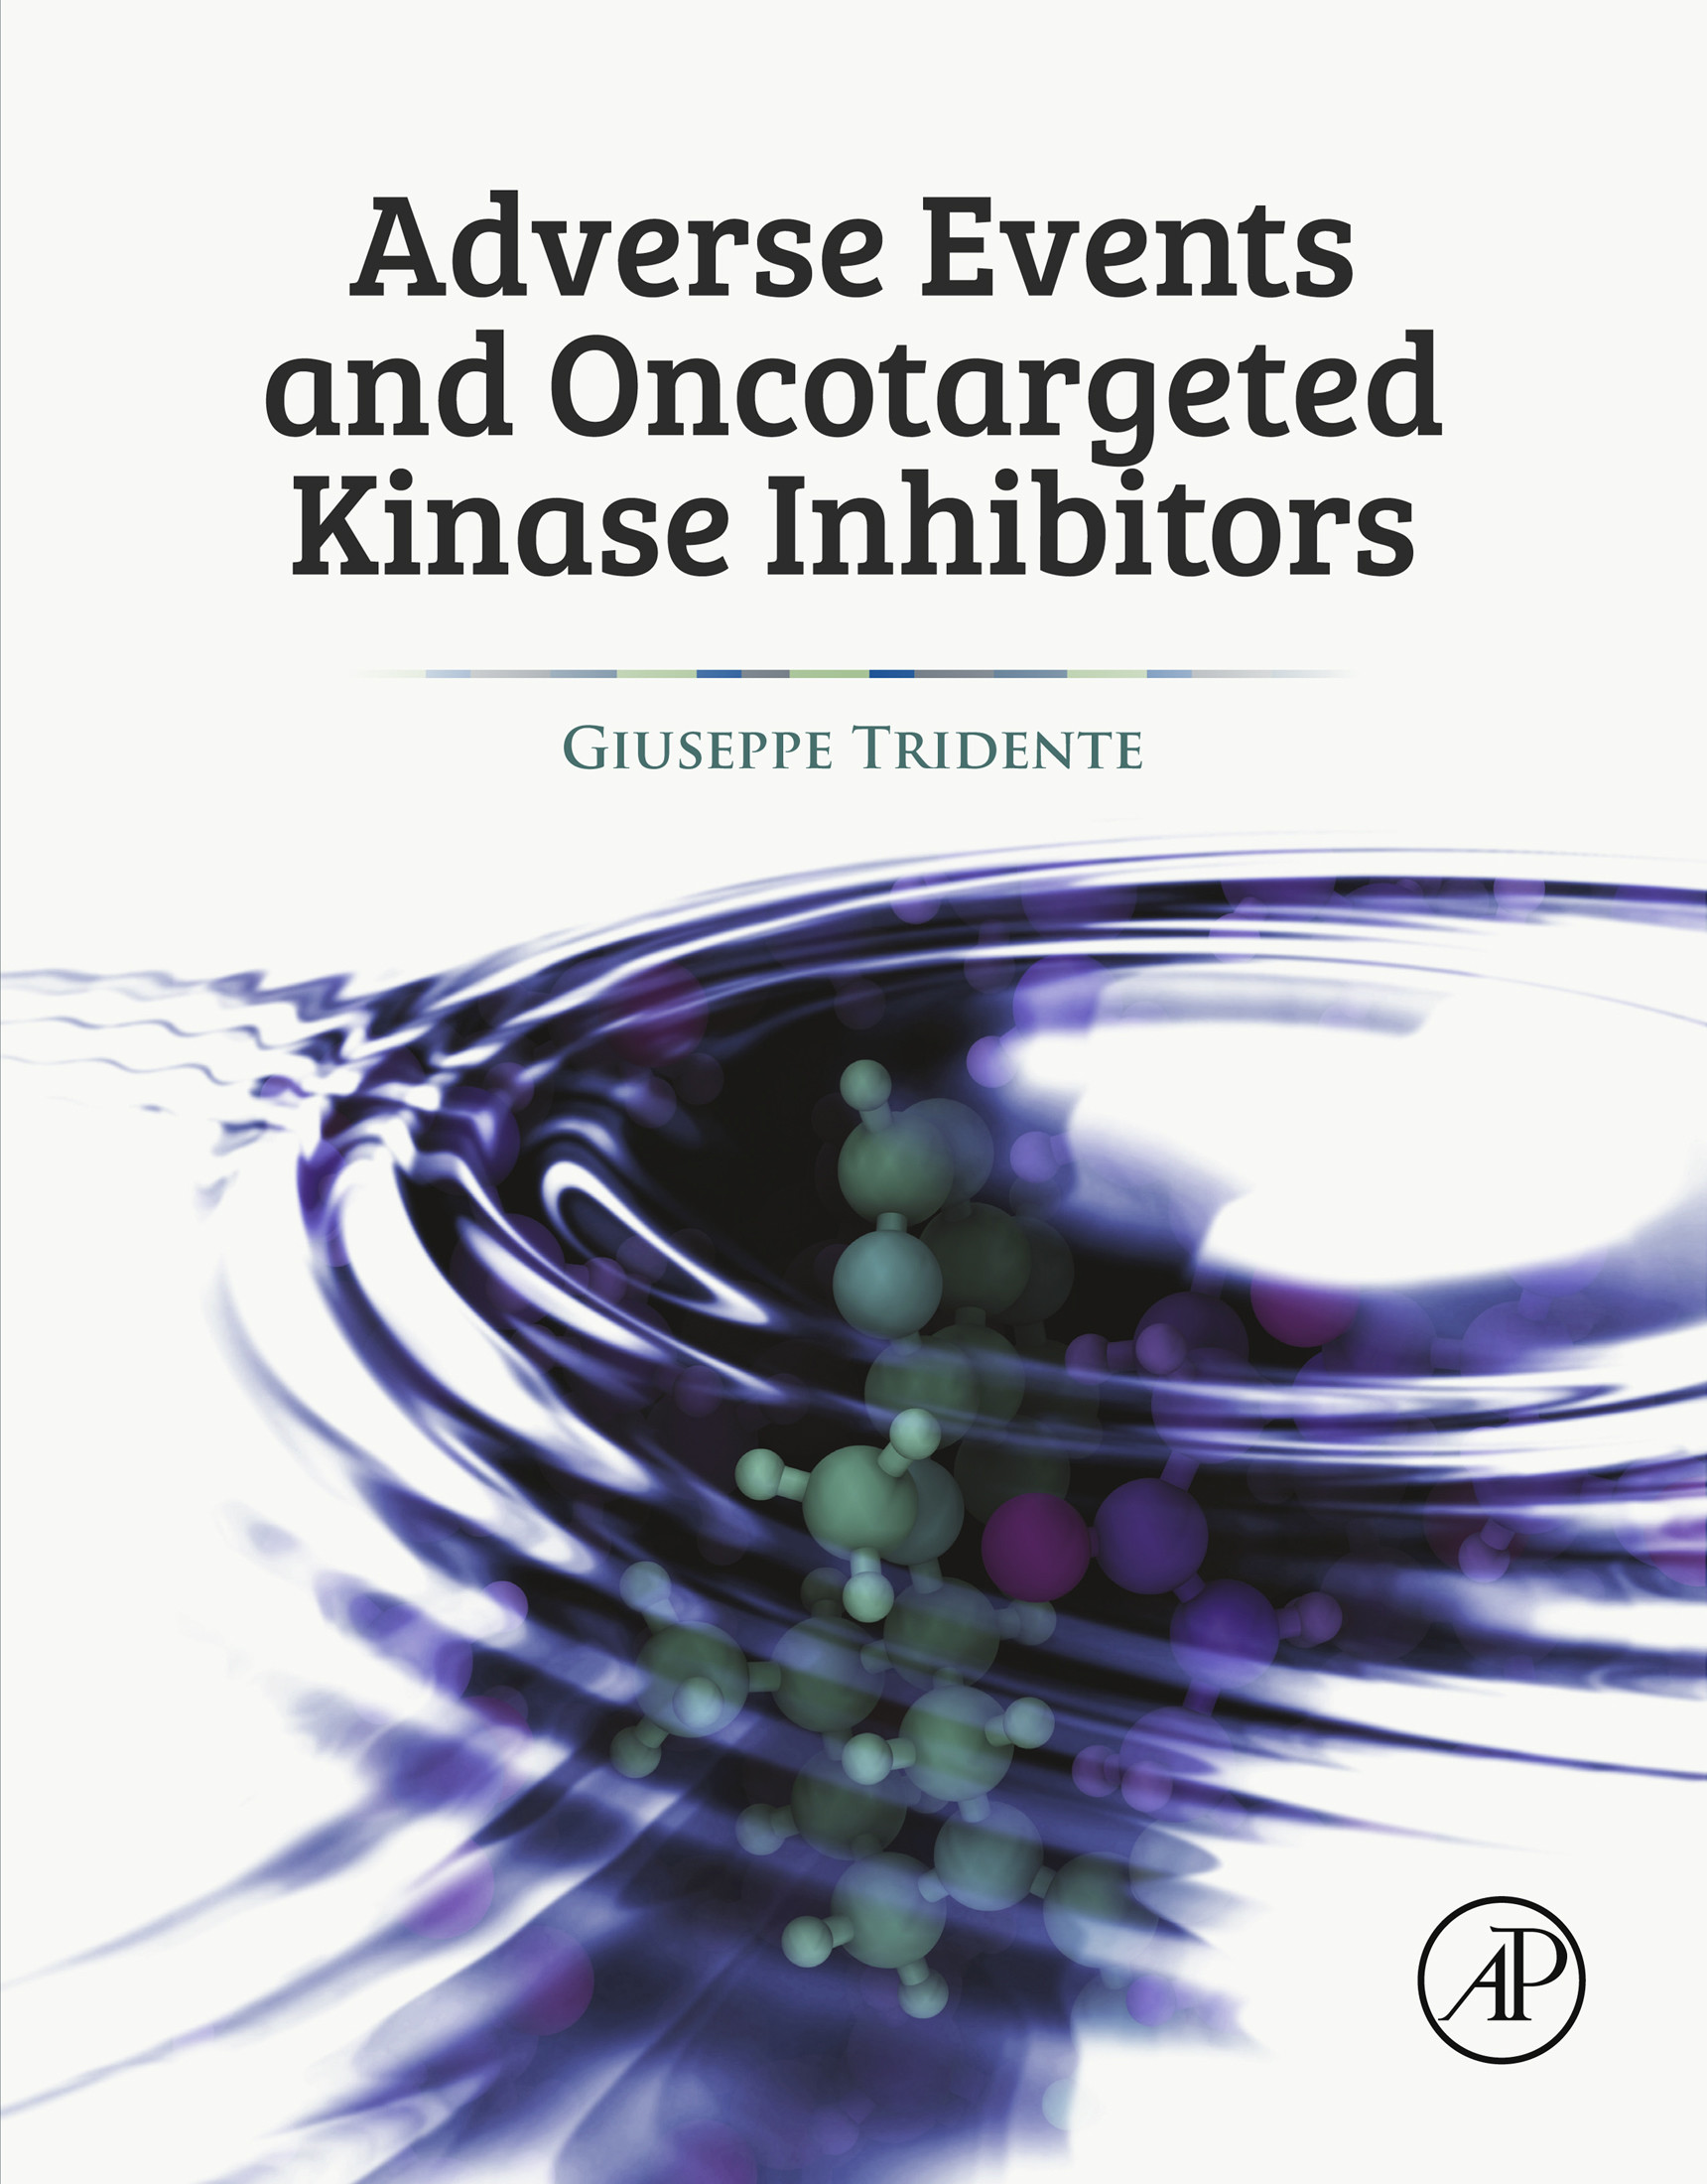 Adverse Events and Oncotargeted Kinase Inhibitors